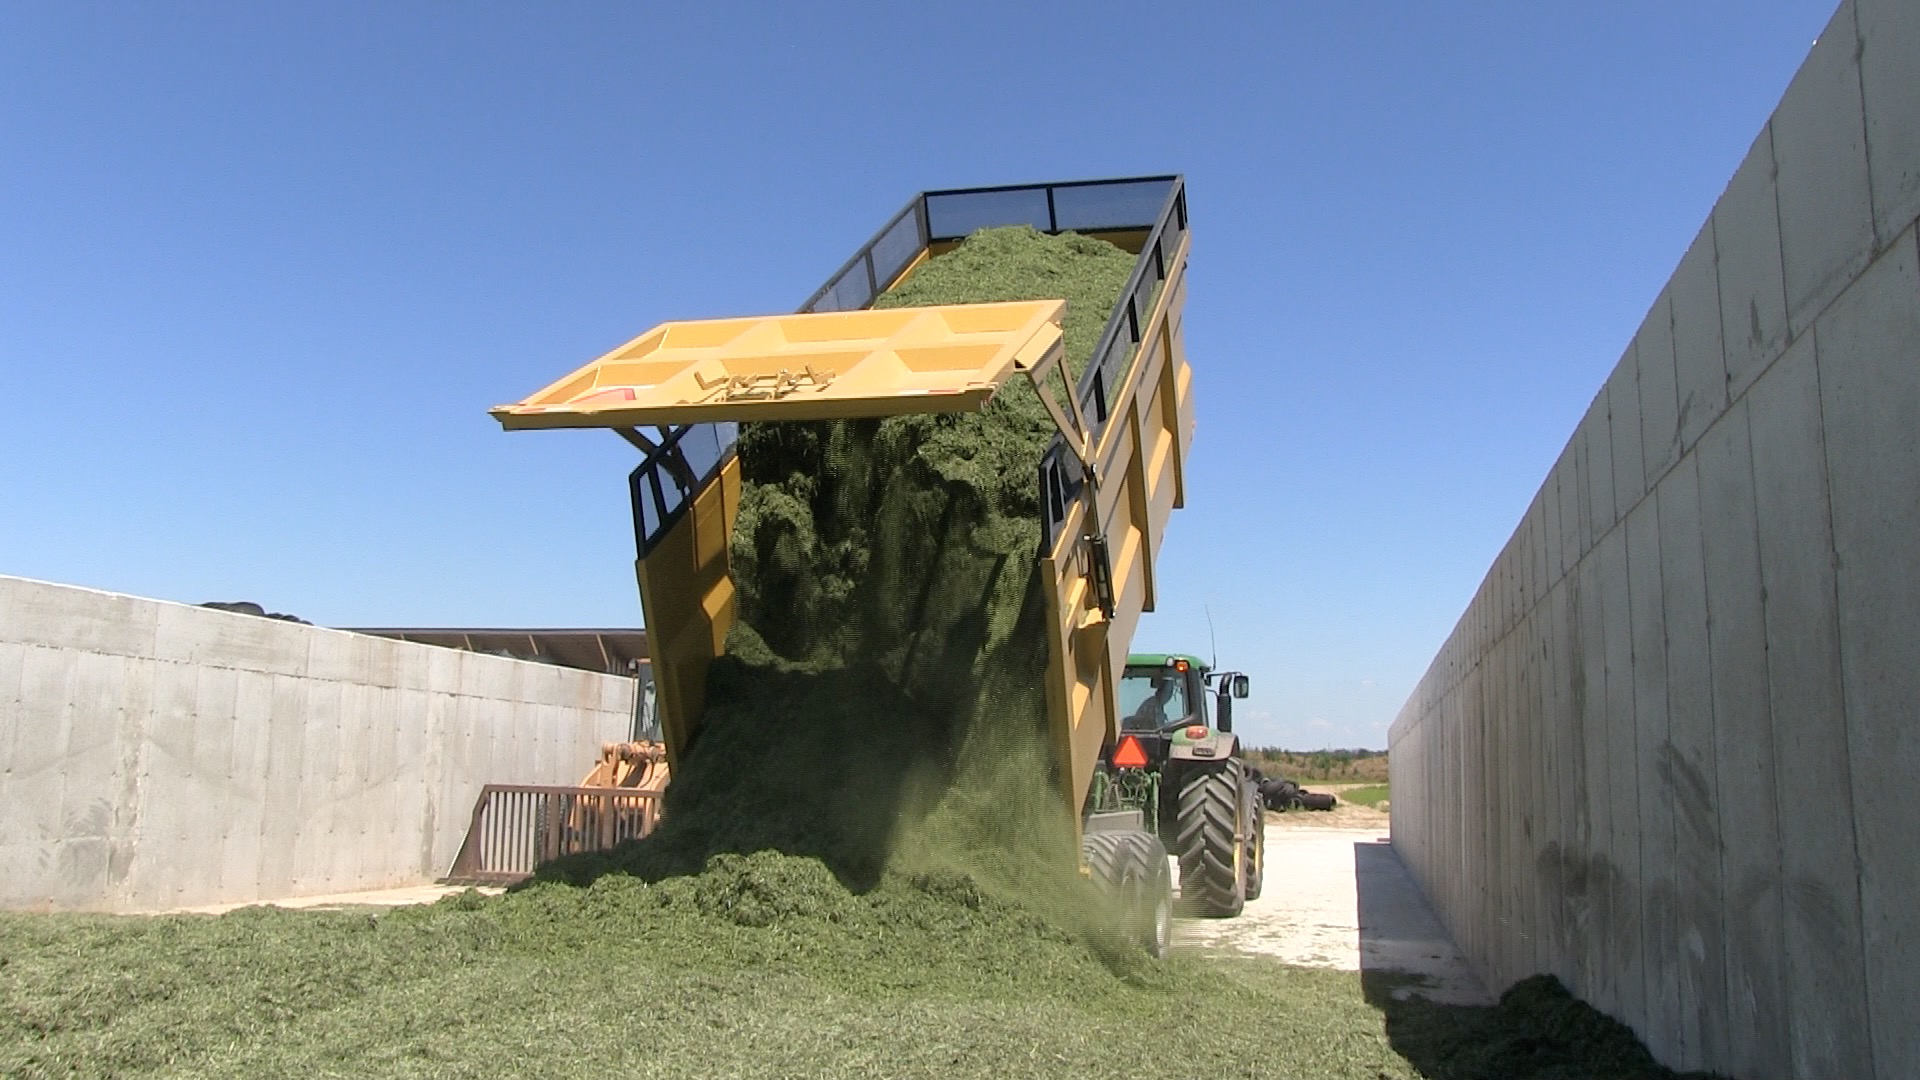 A backshot of the 20 ton silage dump trailer dumping hay silage